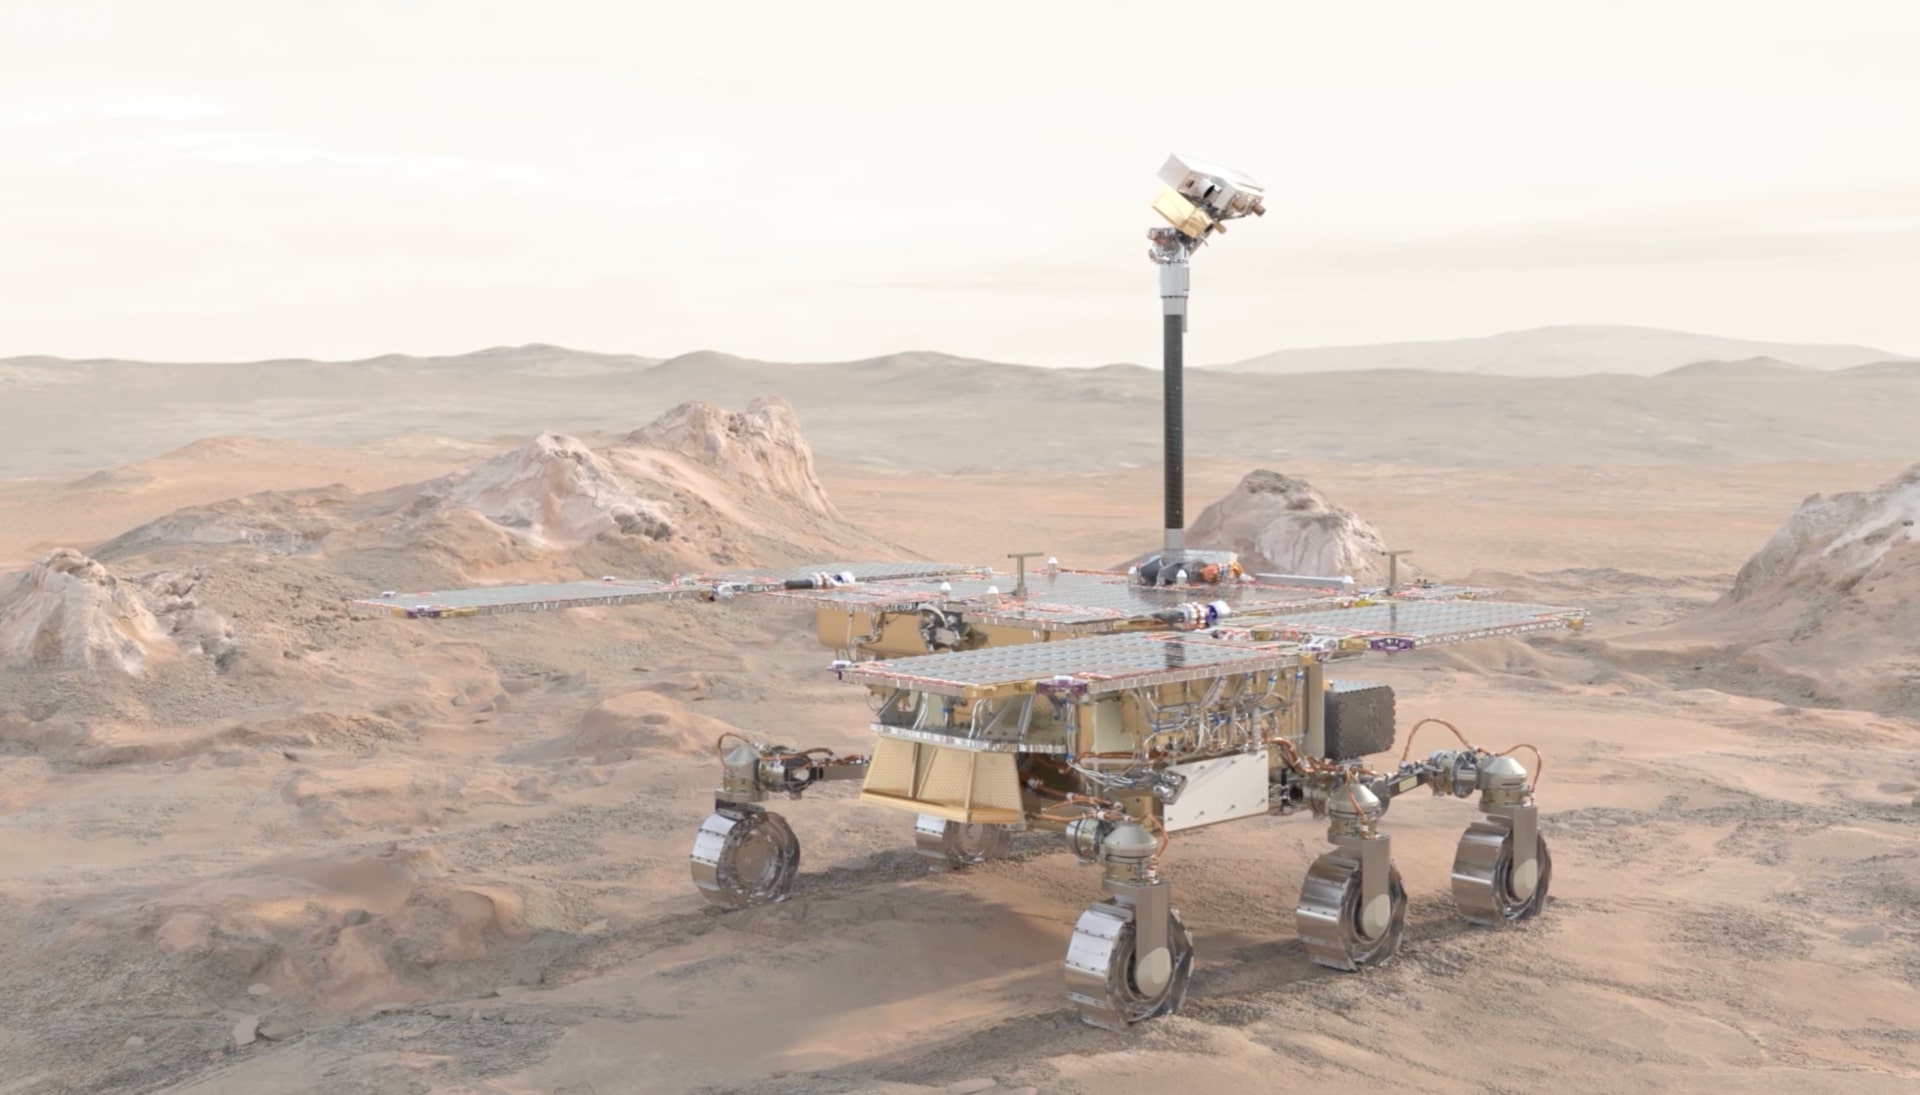 An artist's impression of the Rosalind Franklin rover on Mars.